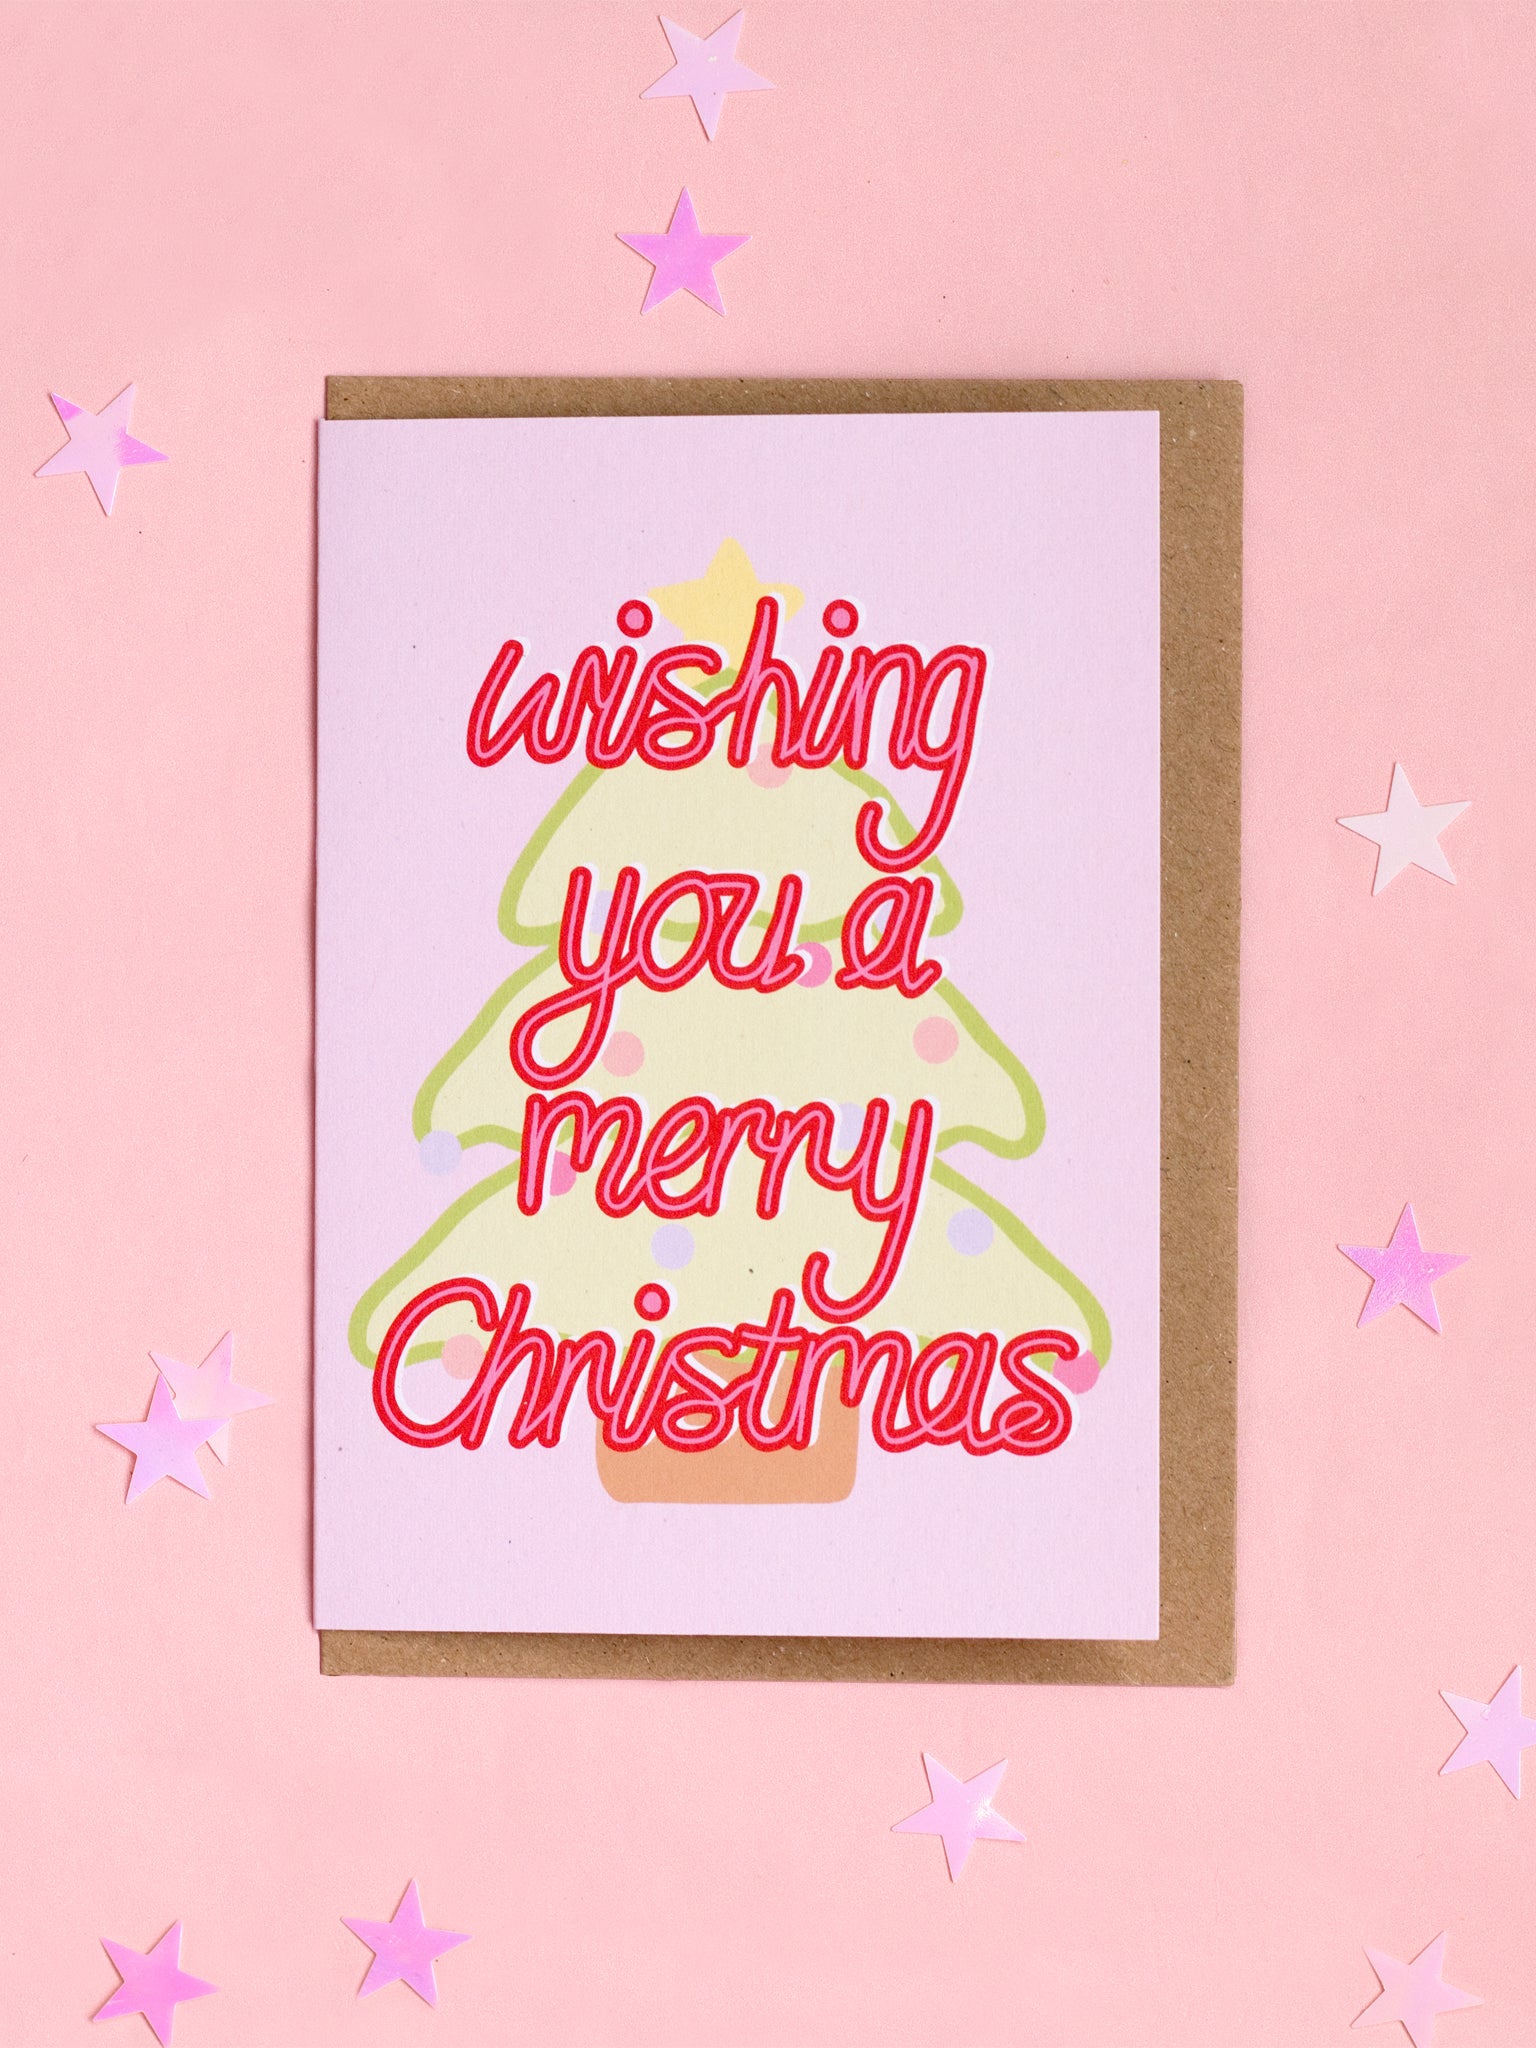 A Christmas card with 'wishing you a merry christmas' in front of a pastel Christmas tree.